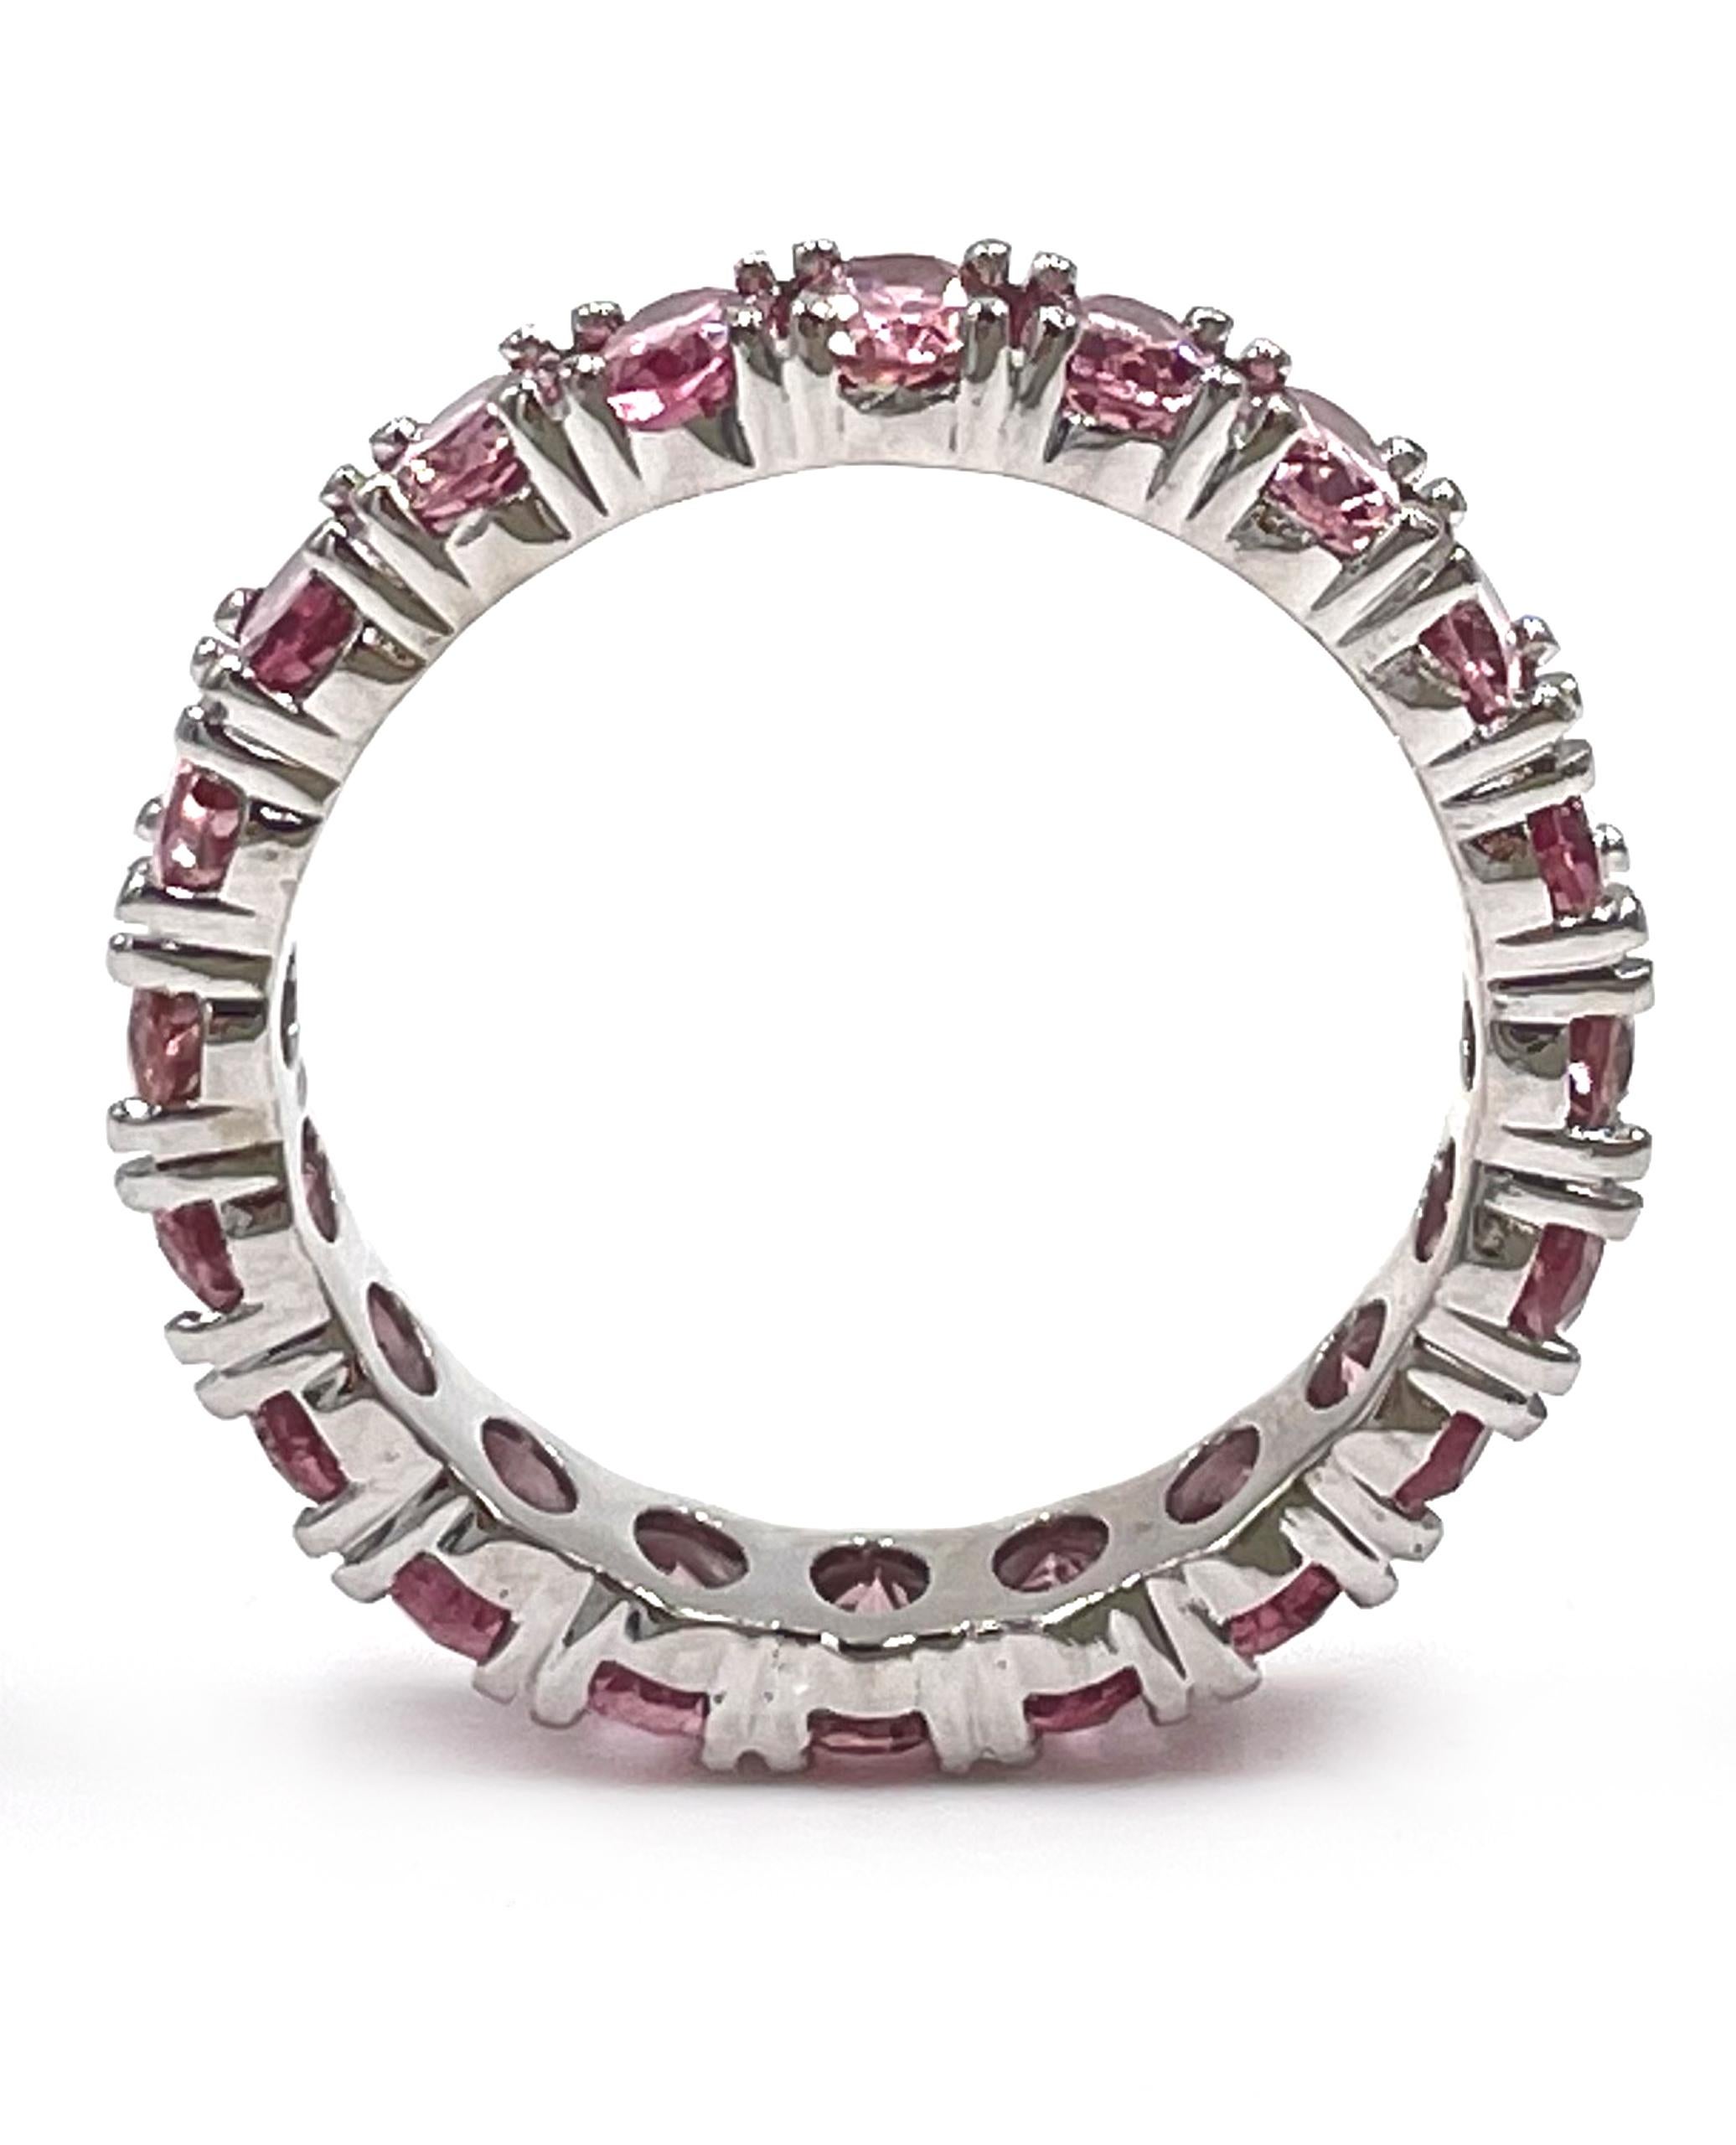 Oval Cut 14K White Gold Oval Shape Pink Tourmaline Eternity Ring - 4.21 carats For Sale